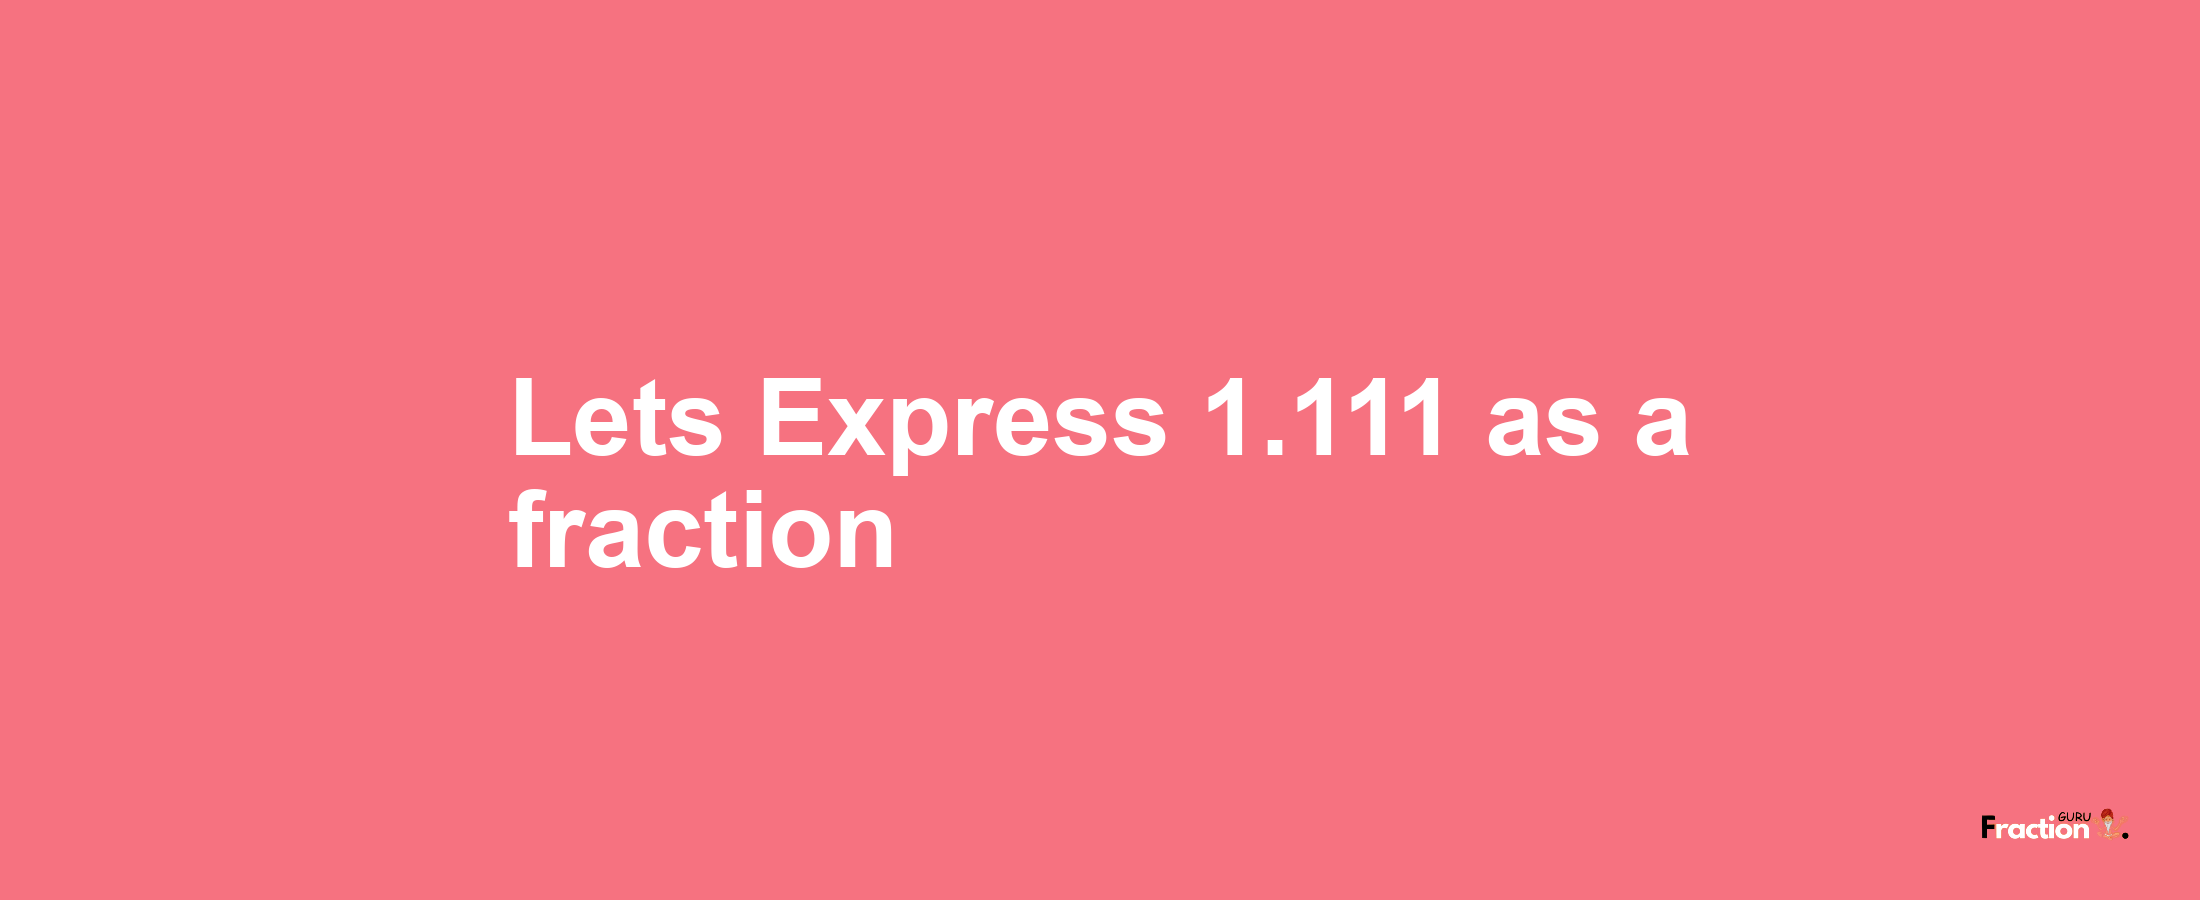 Lets Express 1.111 as afraction